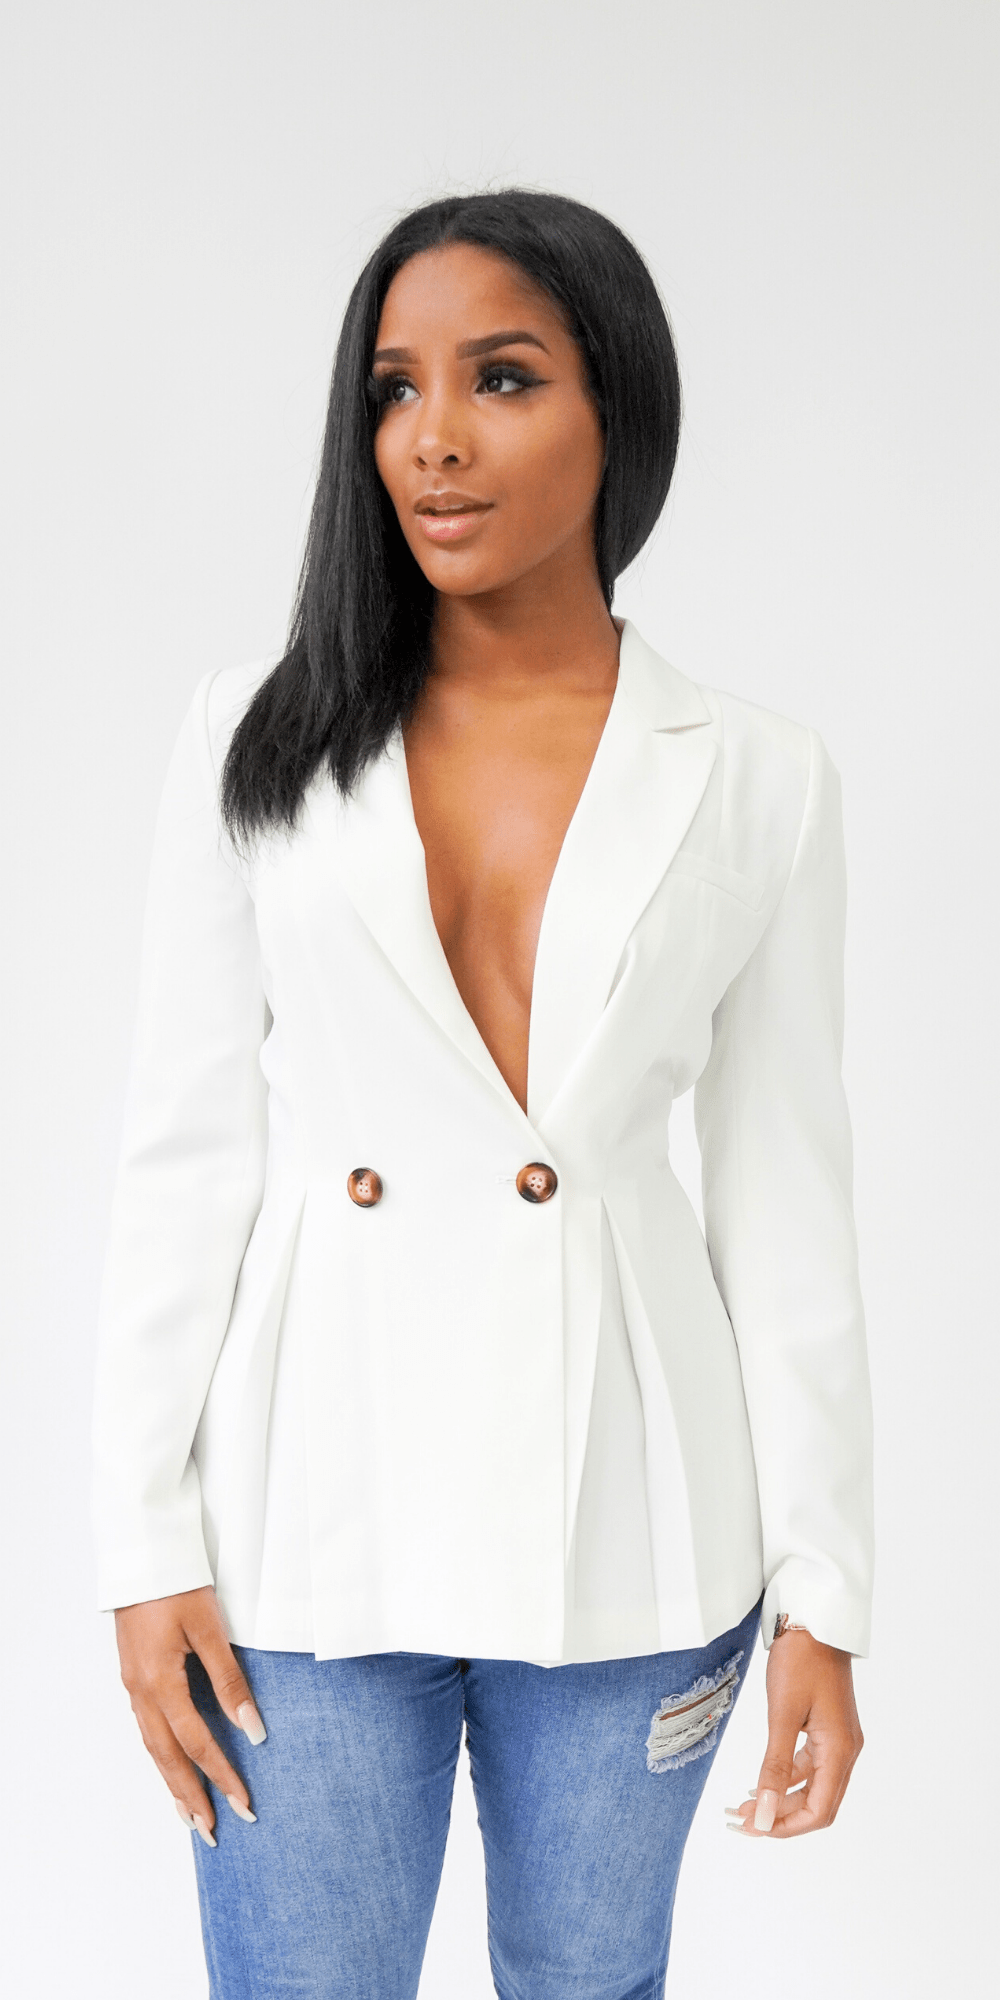 Go Getter | Cut Out Back Blazer - Mustard PREORDER Ships End October - Cutely Covered